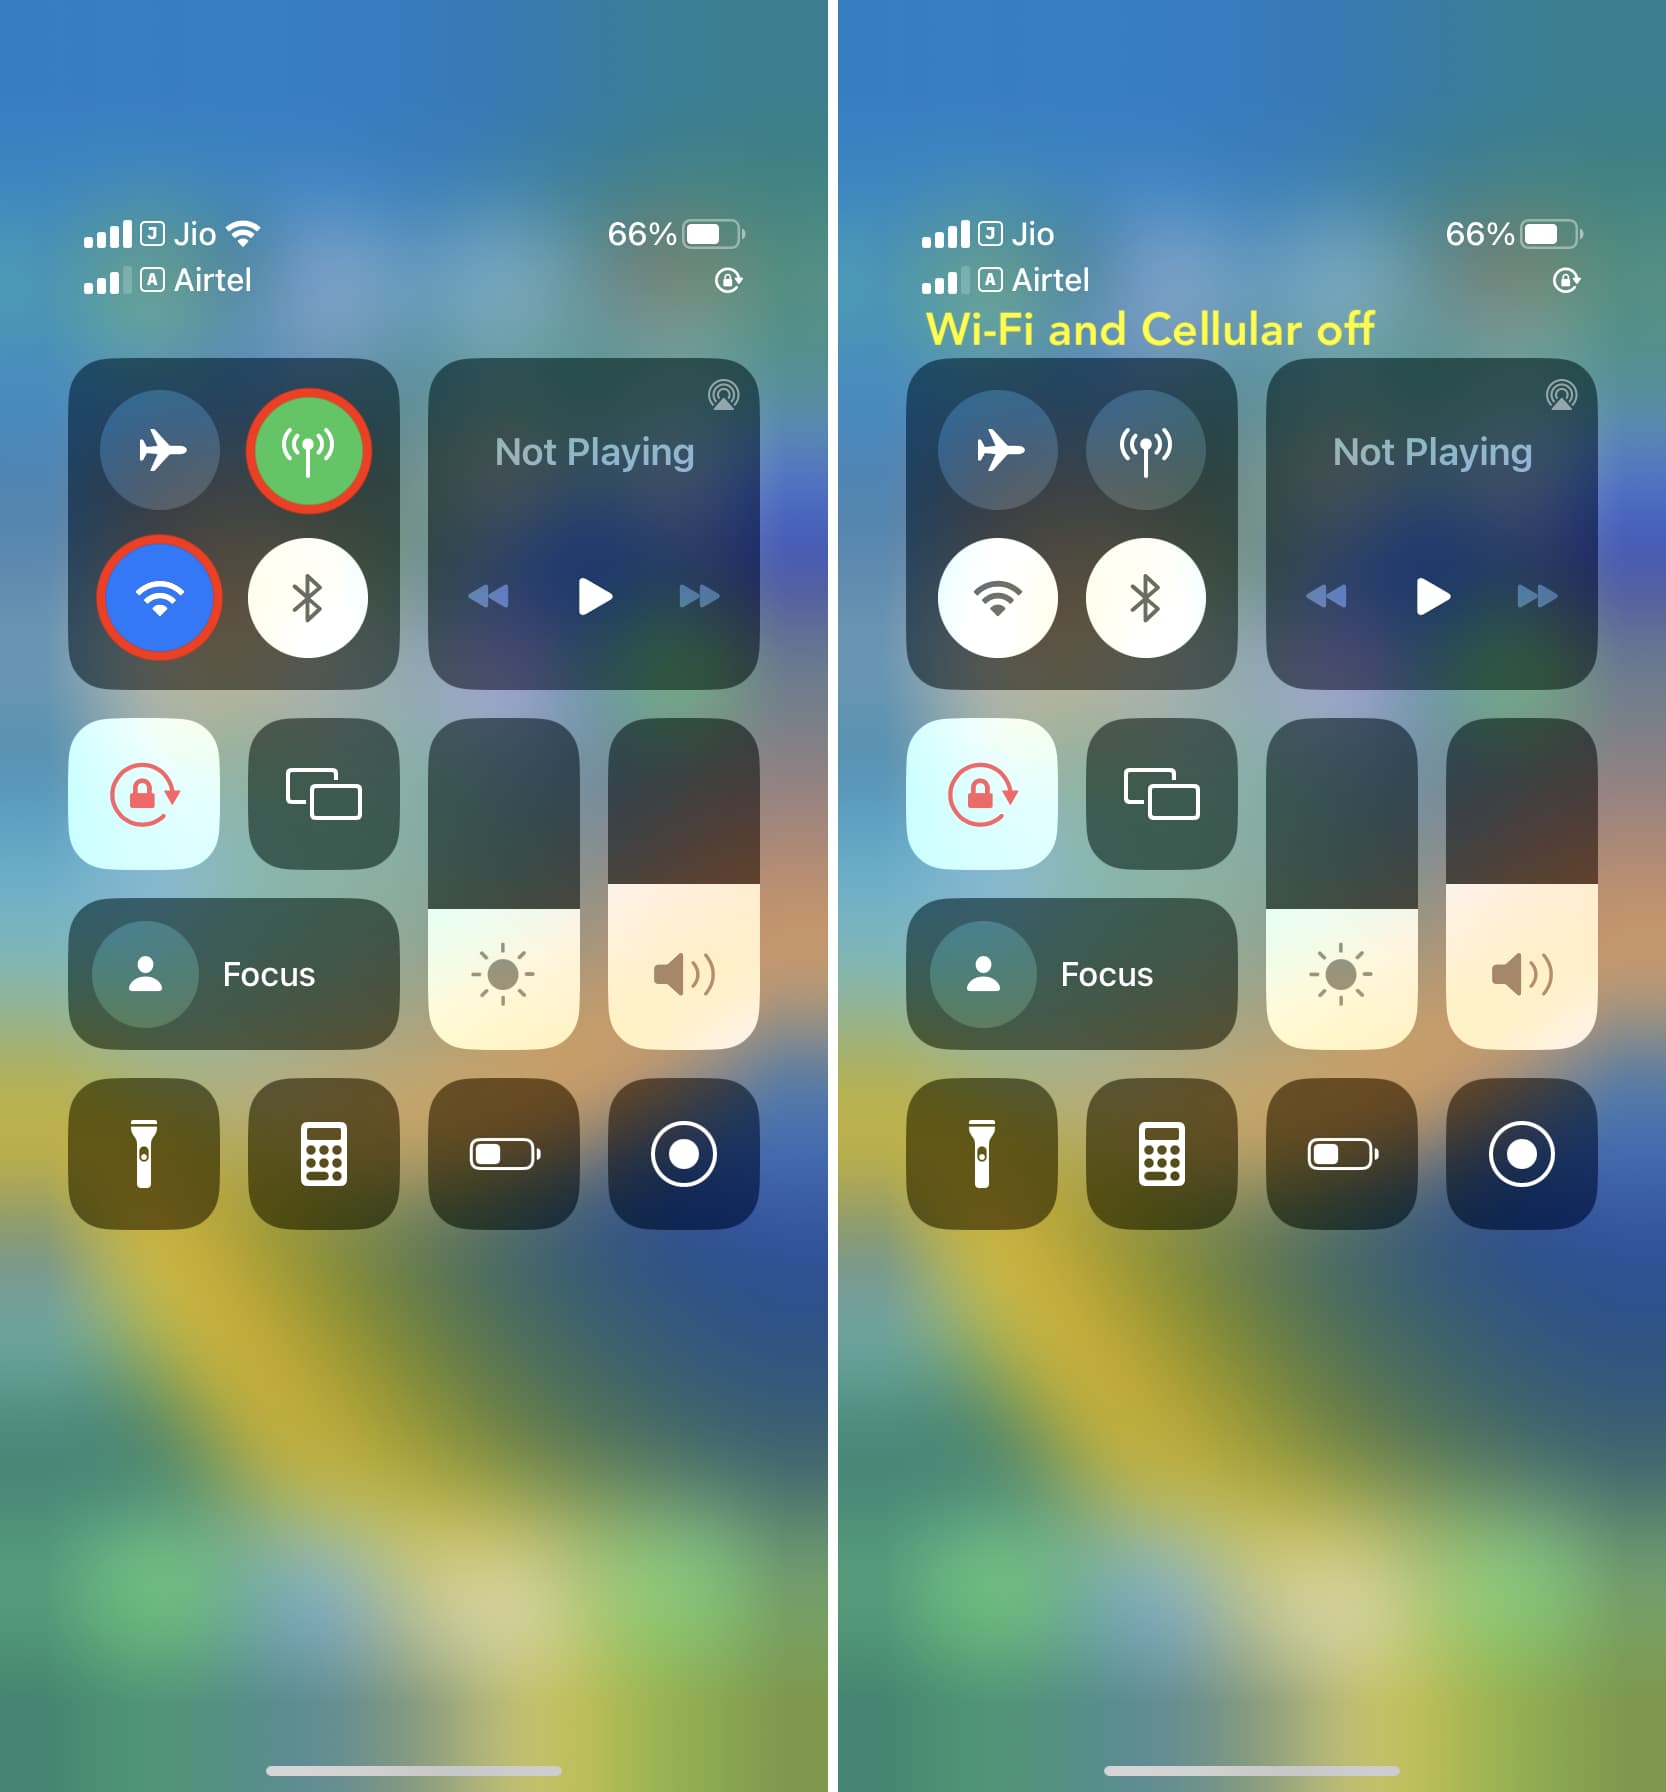 Turn off Wi-Fi and Cellular data on iPhone from the Control Center